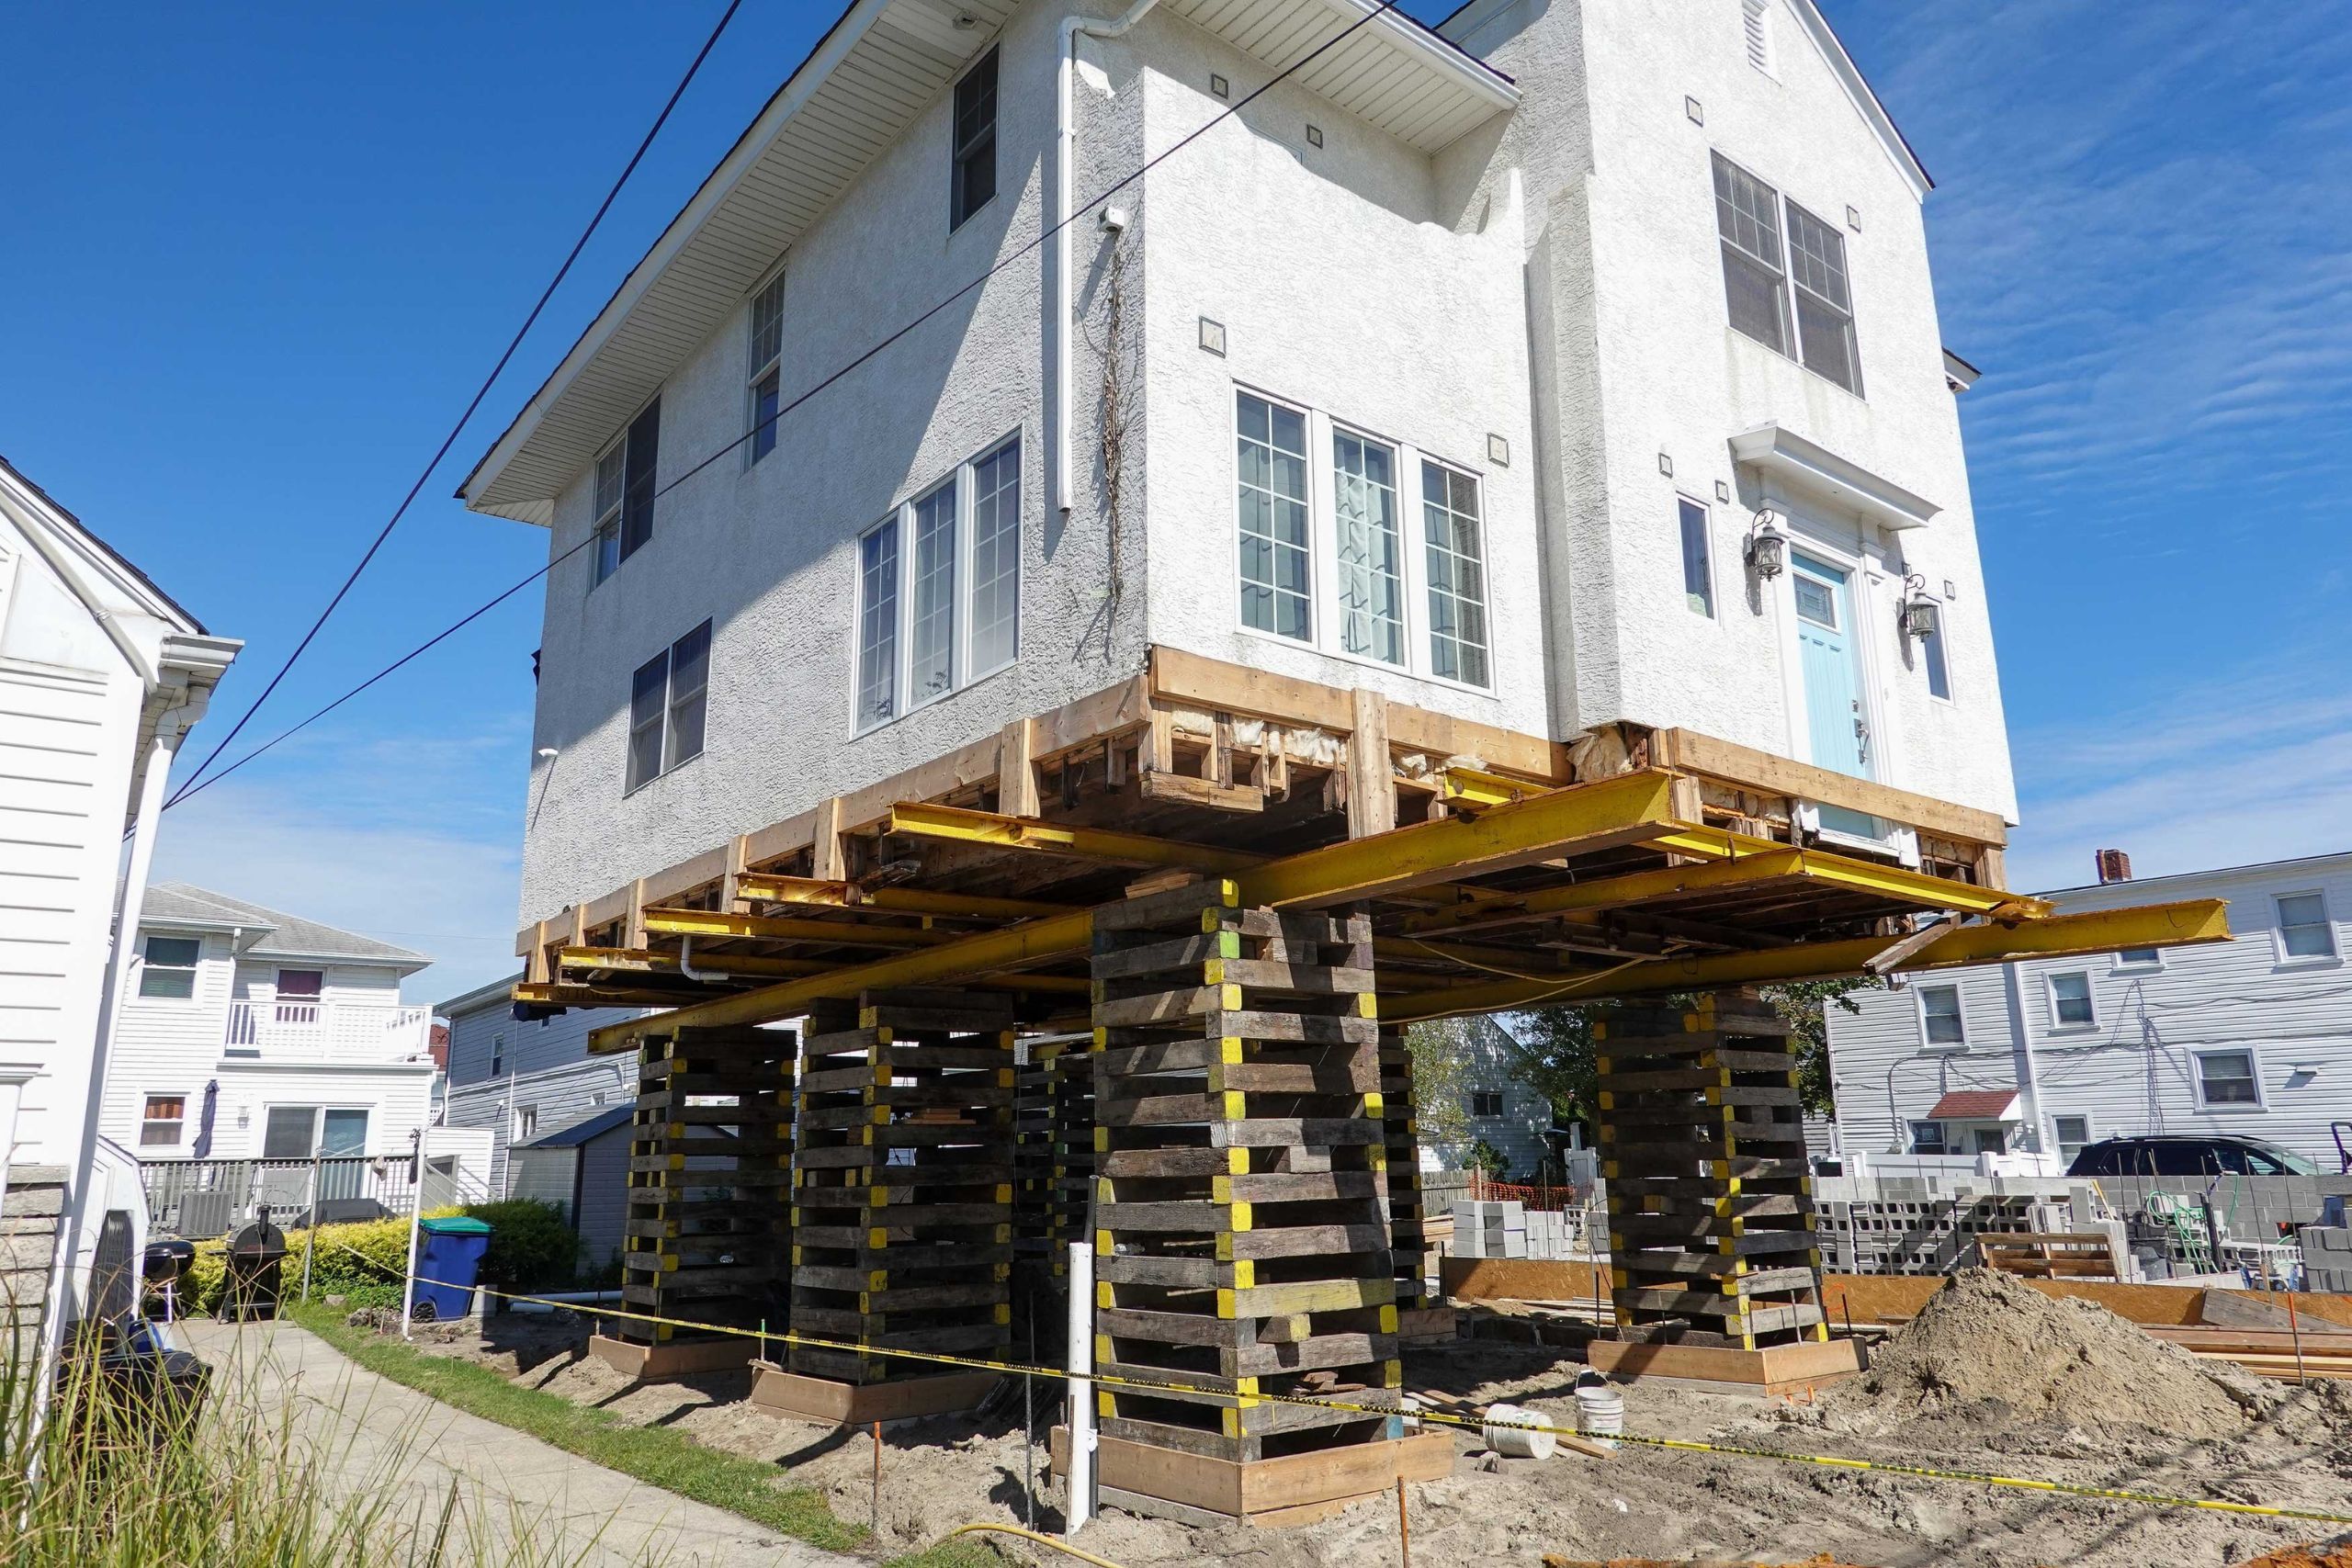 House lifting is one way to fix the foundations of Salt Lake City homes.